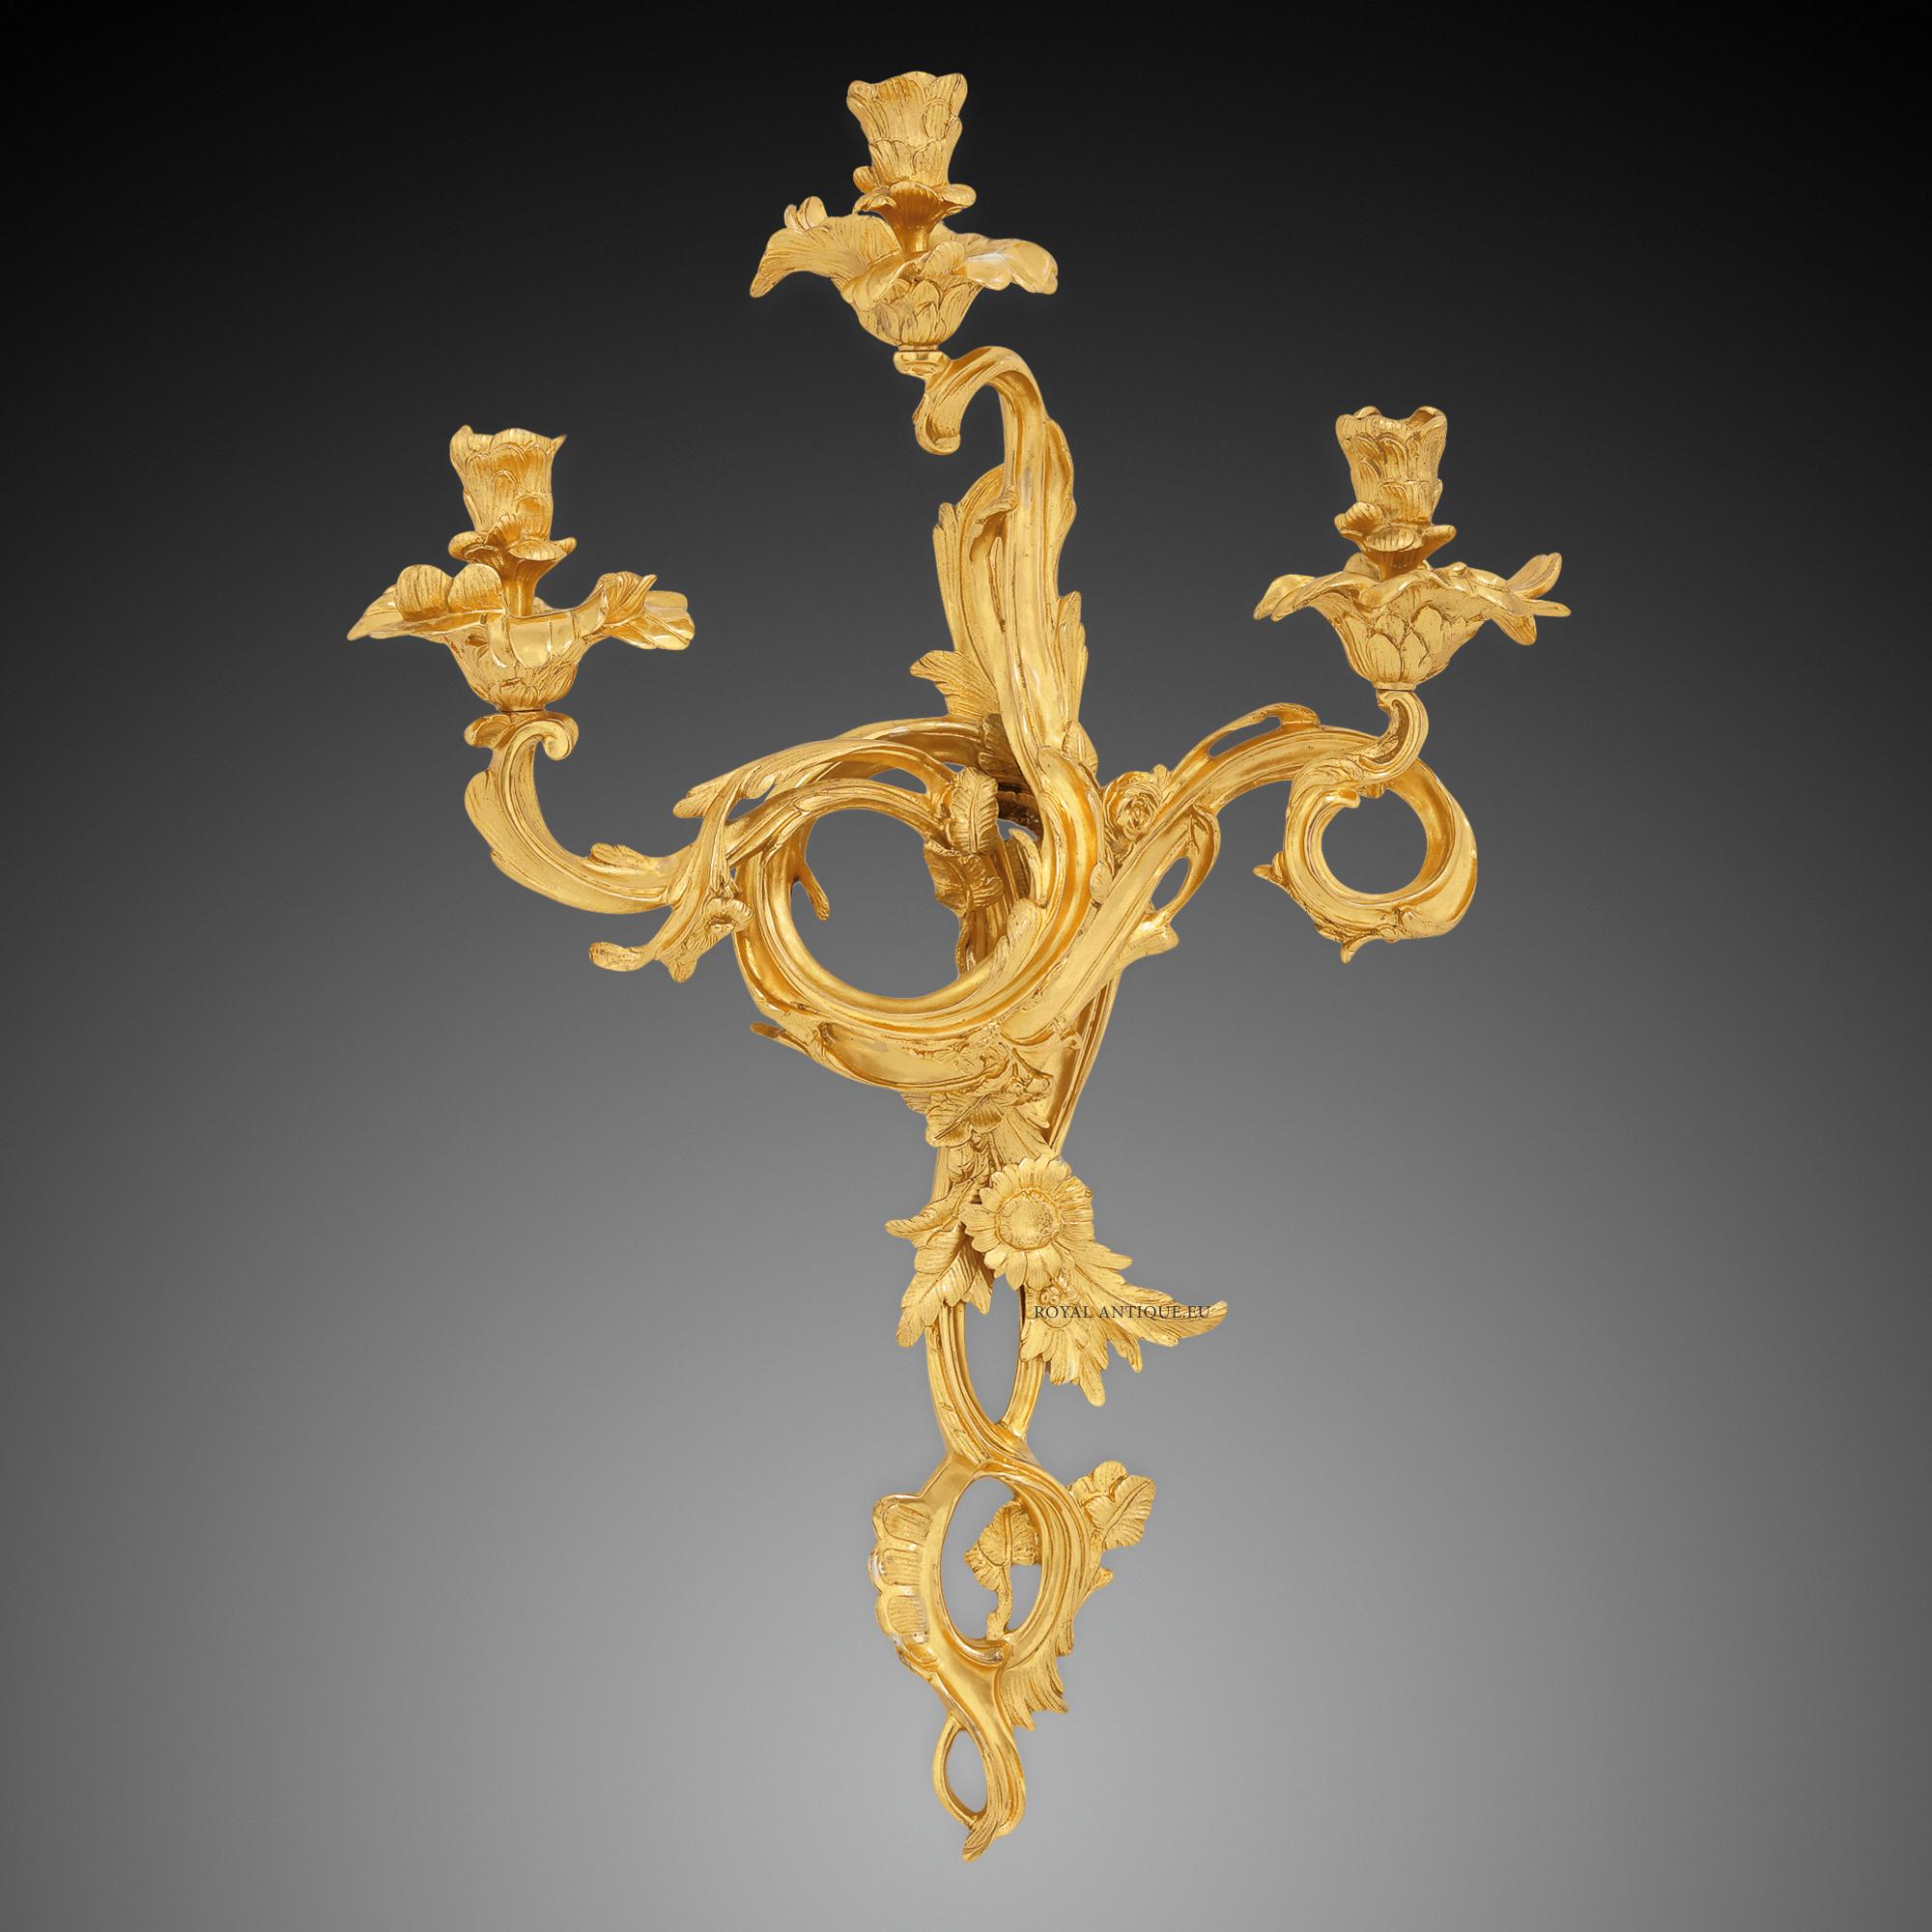 Rococo style sconces made of chiseled brass plated with 24 carats gold with flowers. 3 lights.